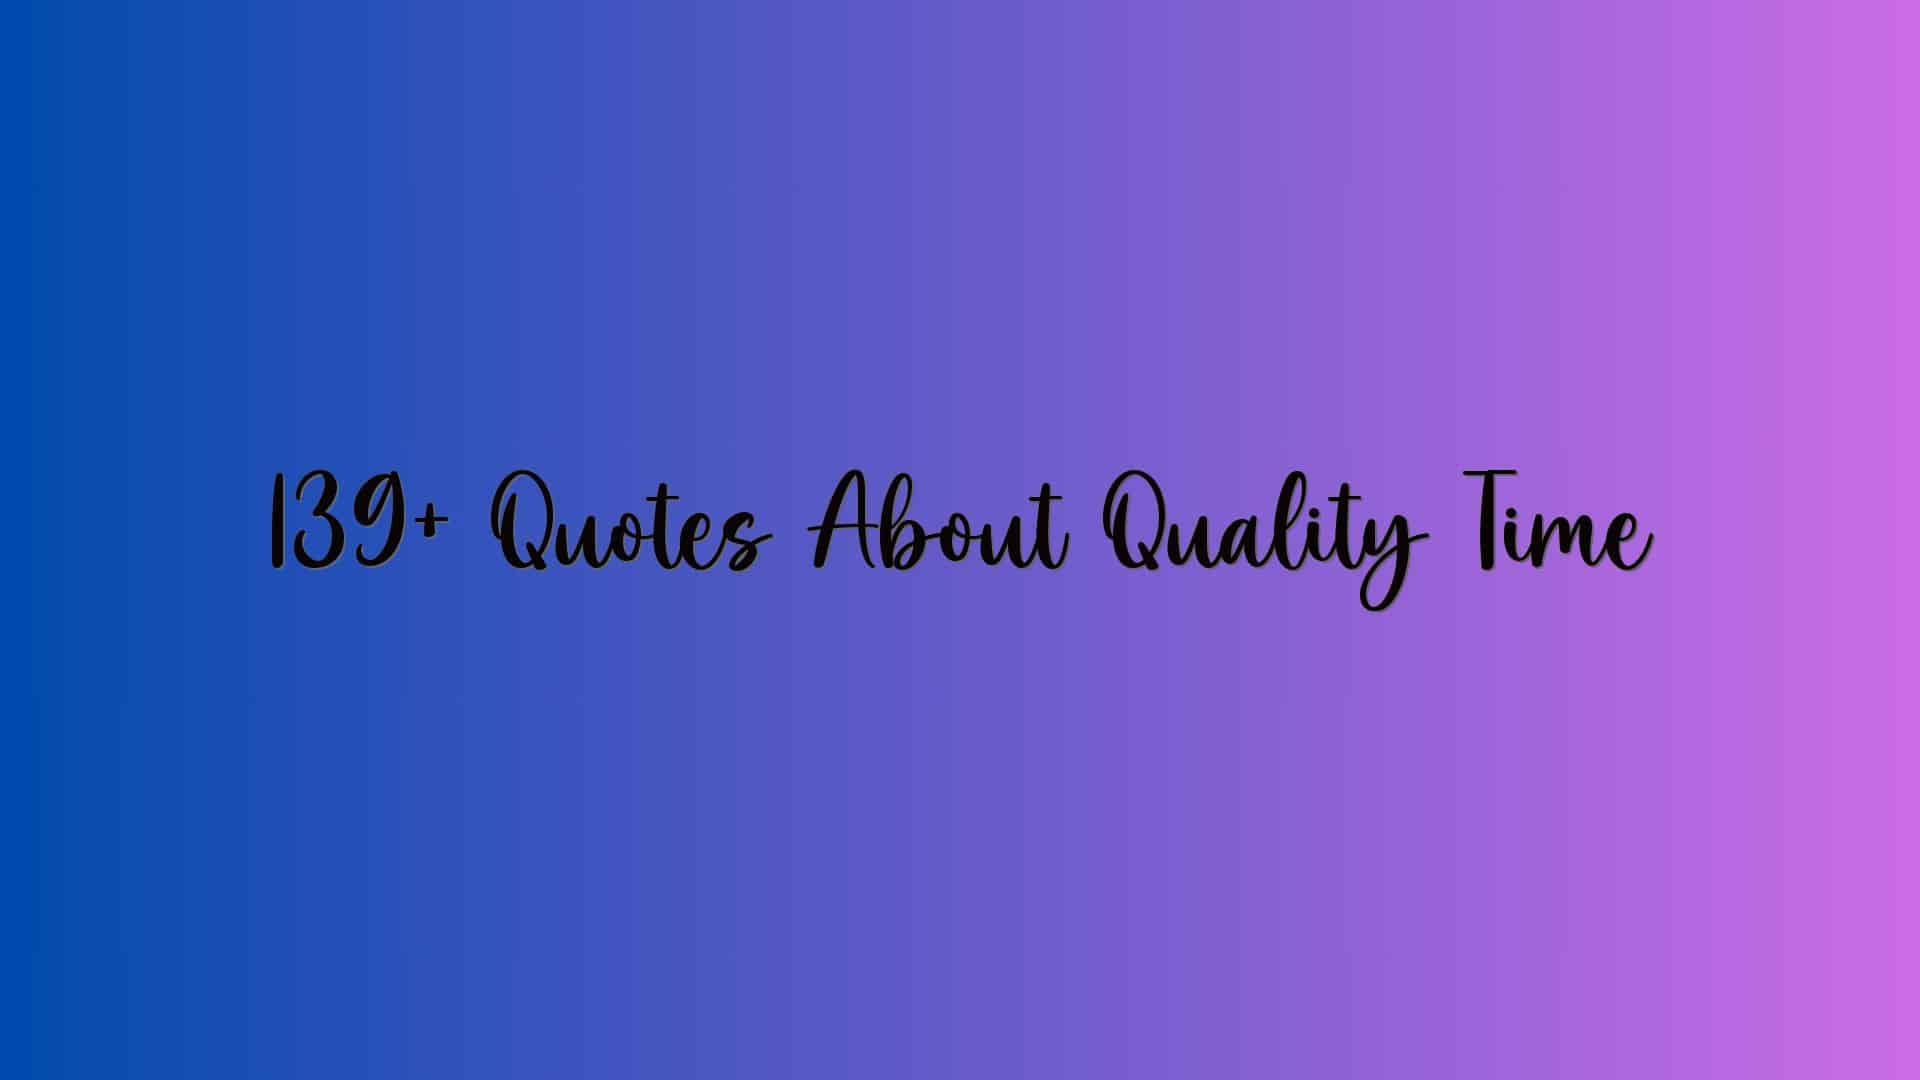 139+ Quotes About Quality Time